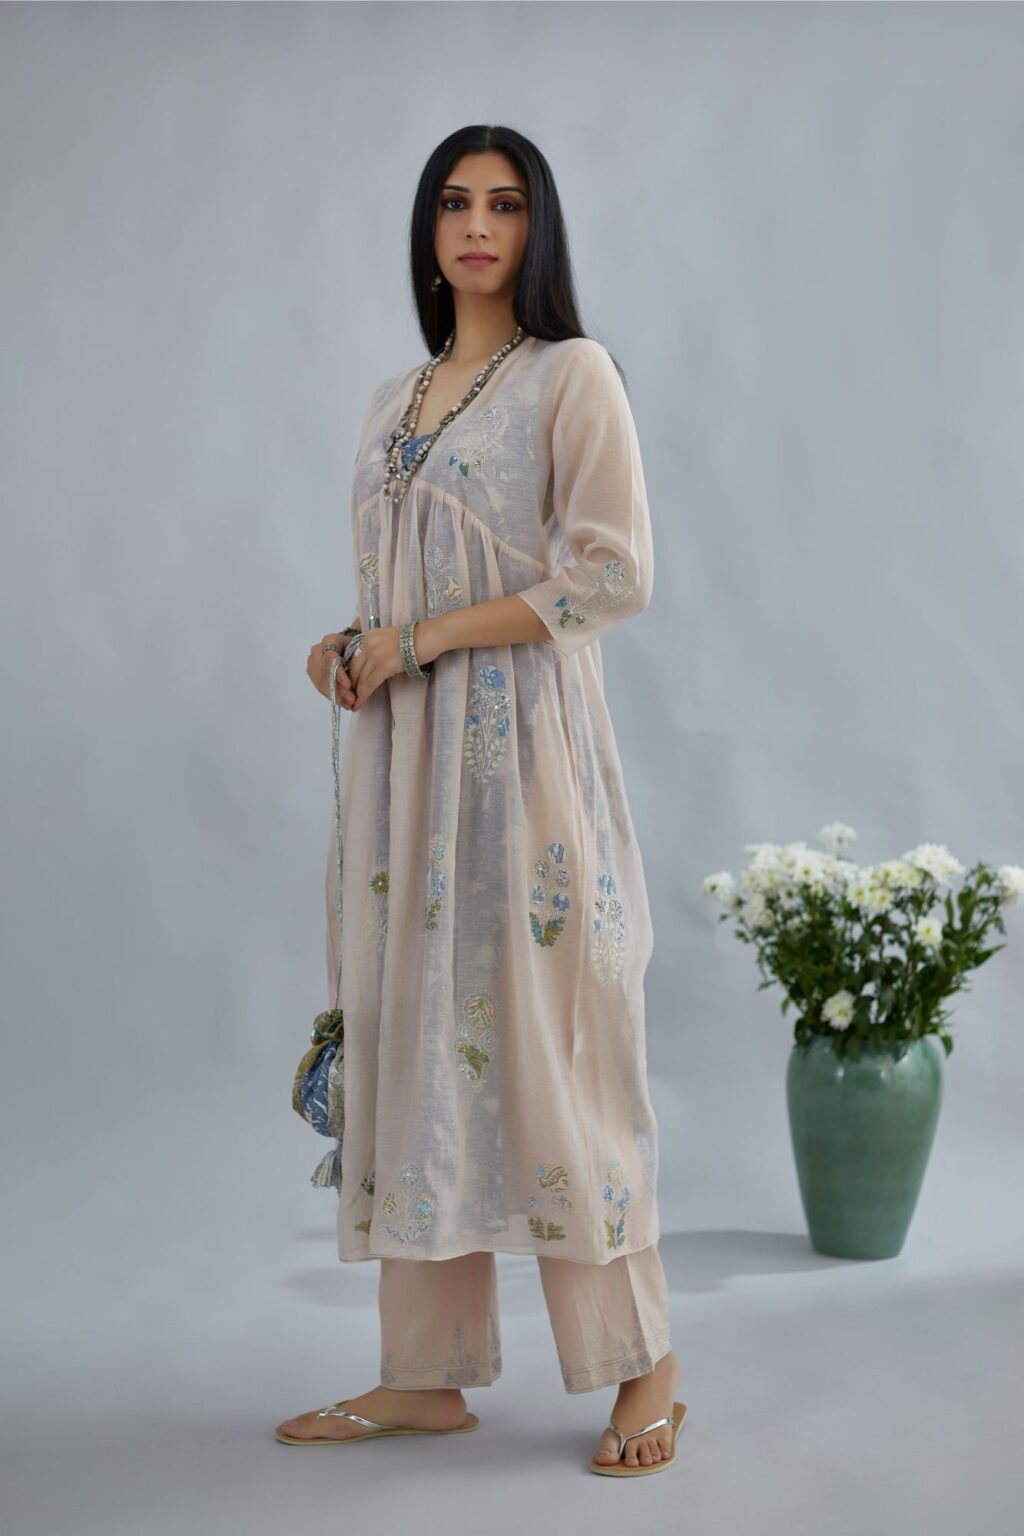 Cotton Chanderi kurta set with all-over assorted print floral applique, highlighted with sequin and silver zari embroidery.